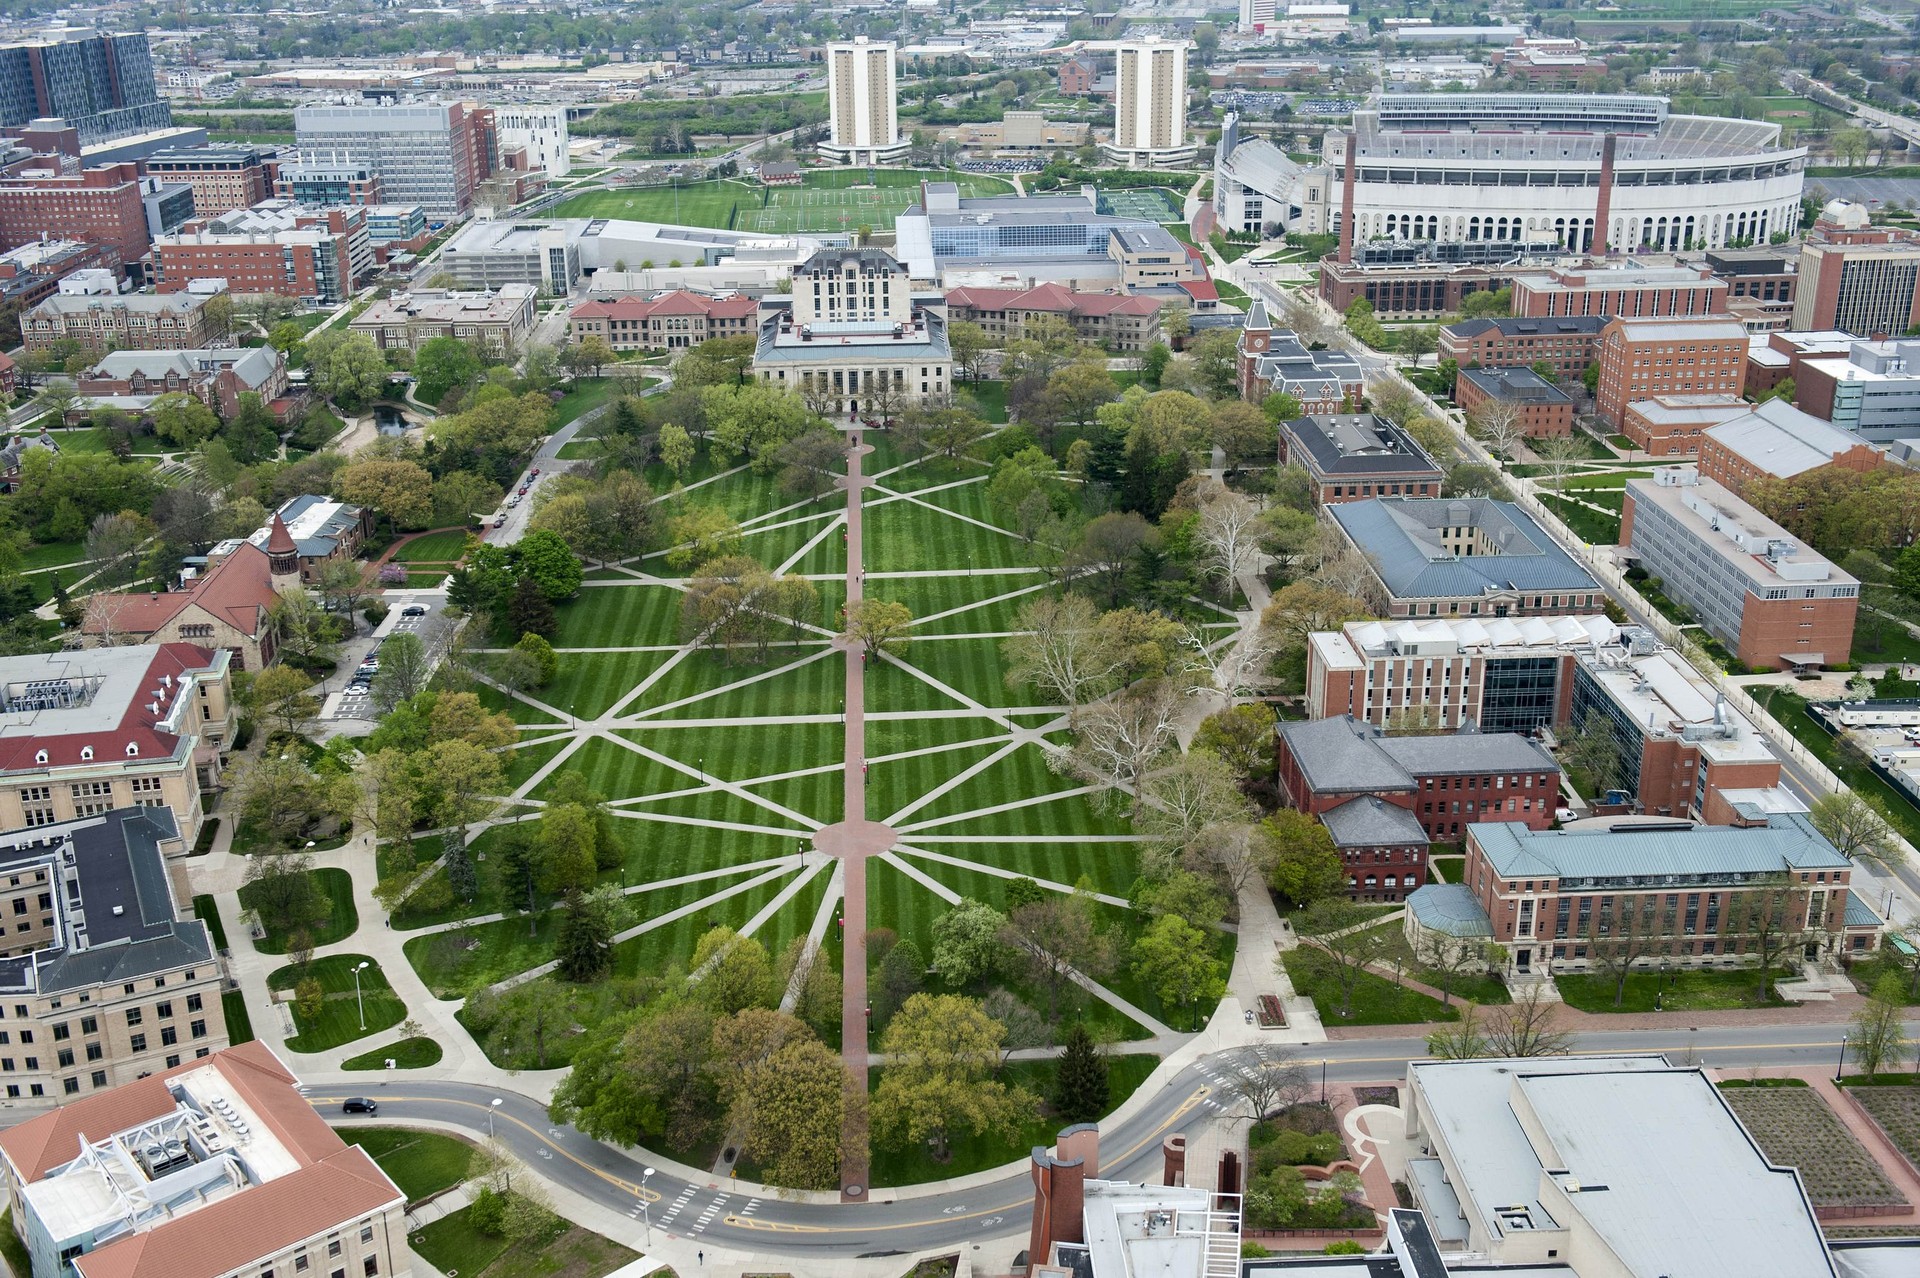 Aerial view of The Ohio State University campus